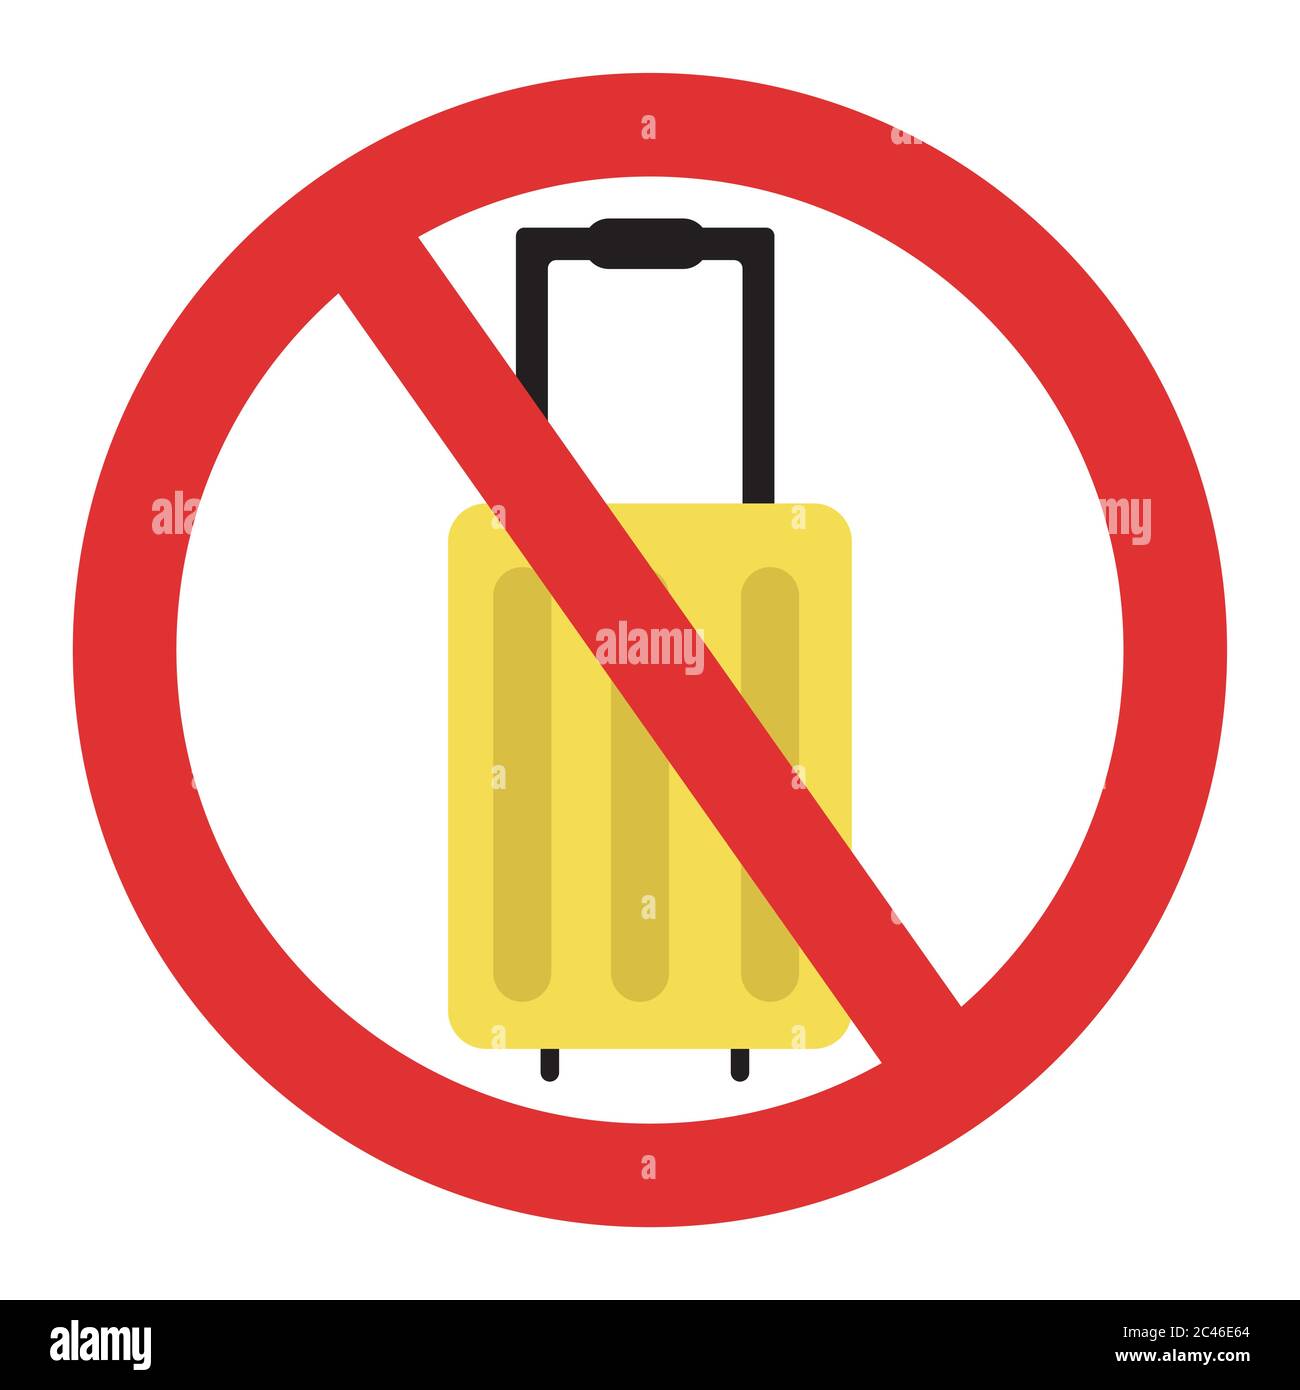 Ban on luggage. Stop travel isolated illustration. Stay home COVID-19 prevention. Stock Vector